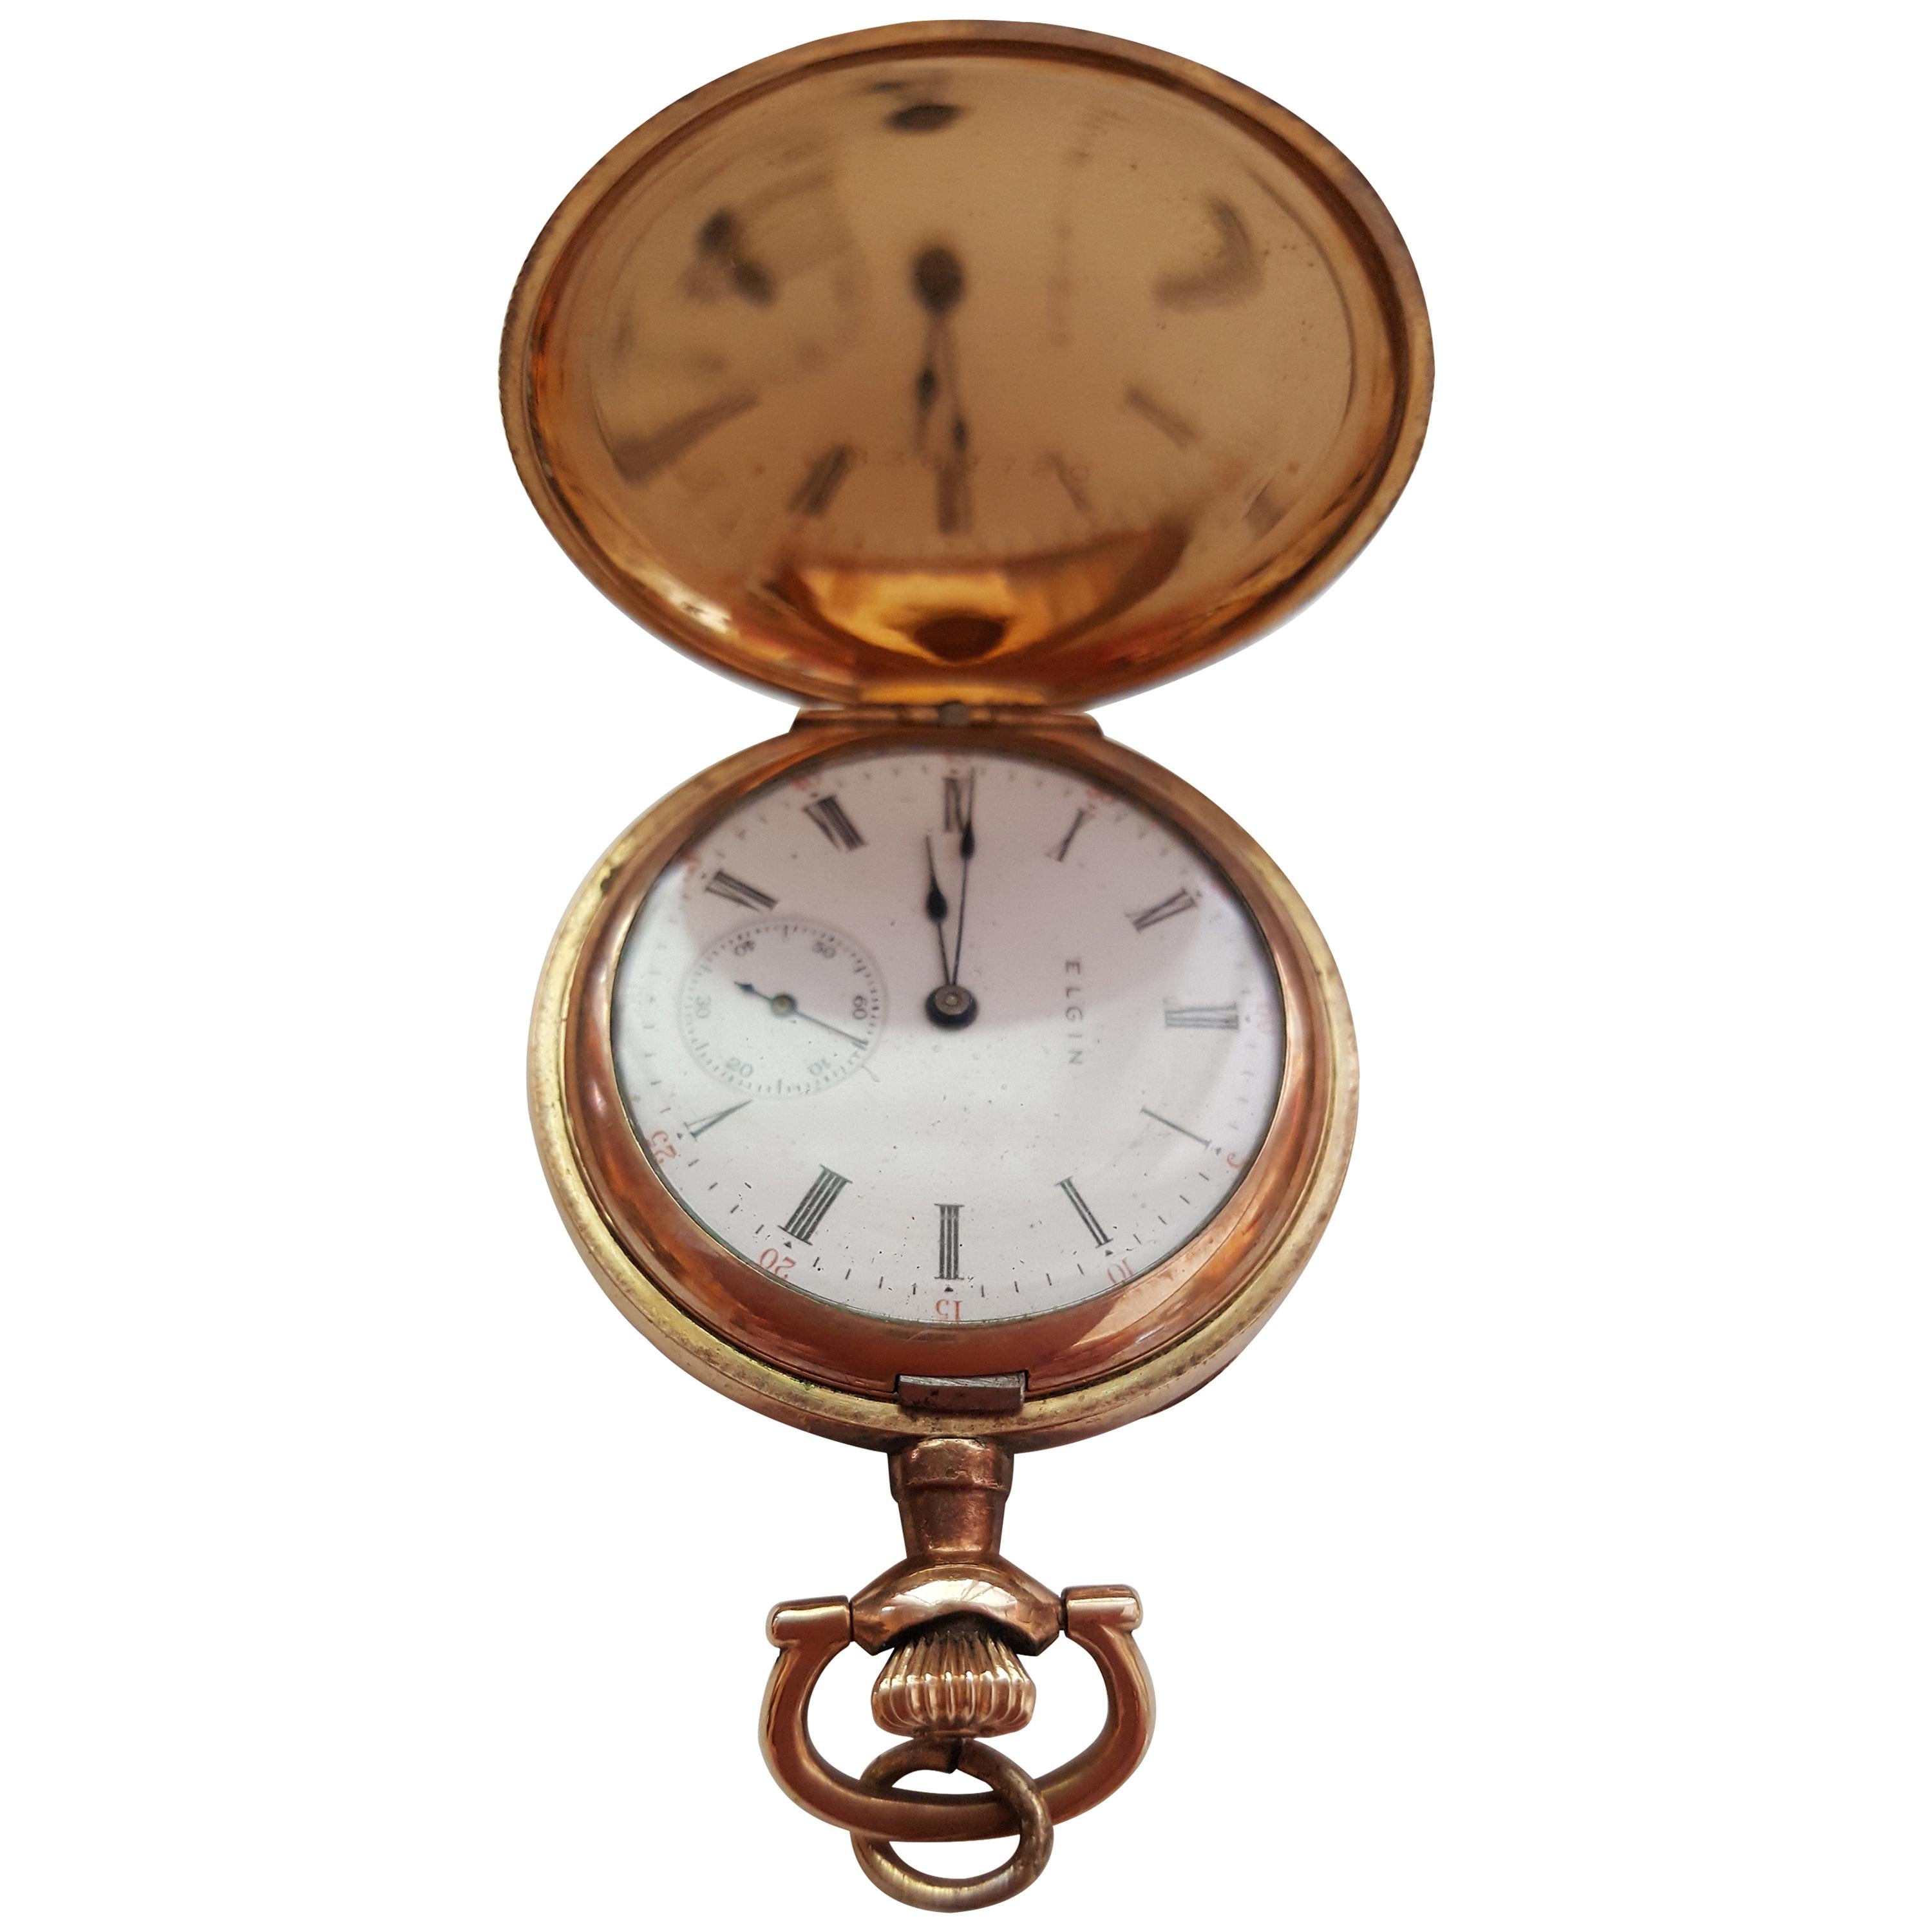 Vintage 1909 Gold-Plated Elgin Pocket Watch, Working, Very Good Condition